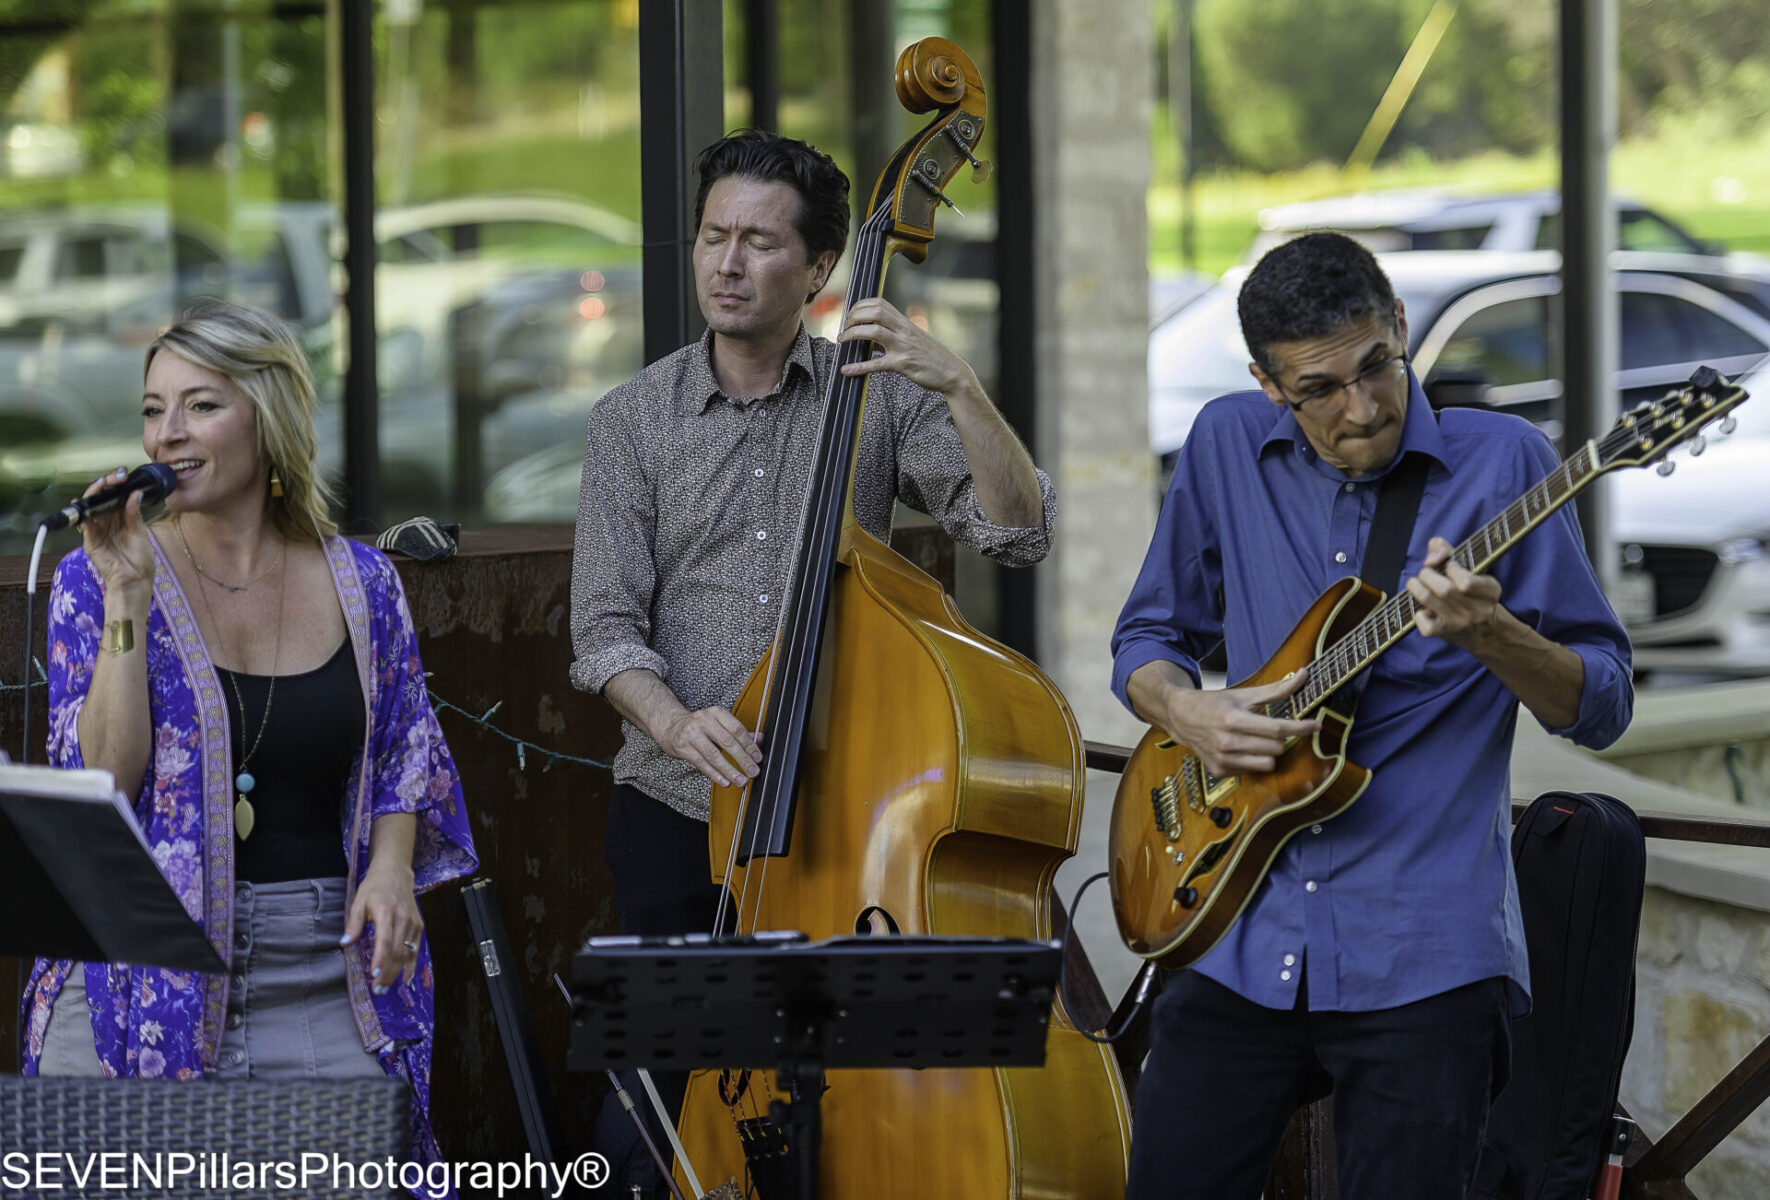 A jazz trio consisting of two men and a lead female vocalist jamming in an outdoor corner street